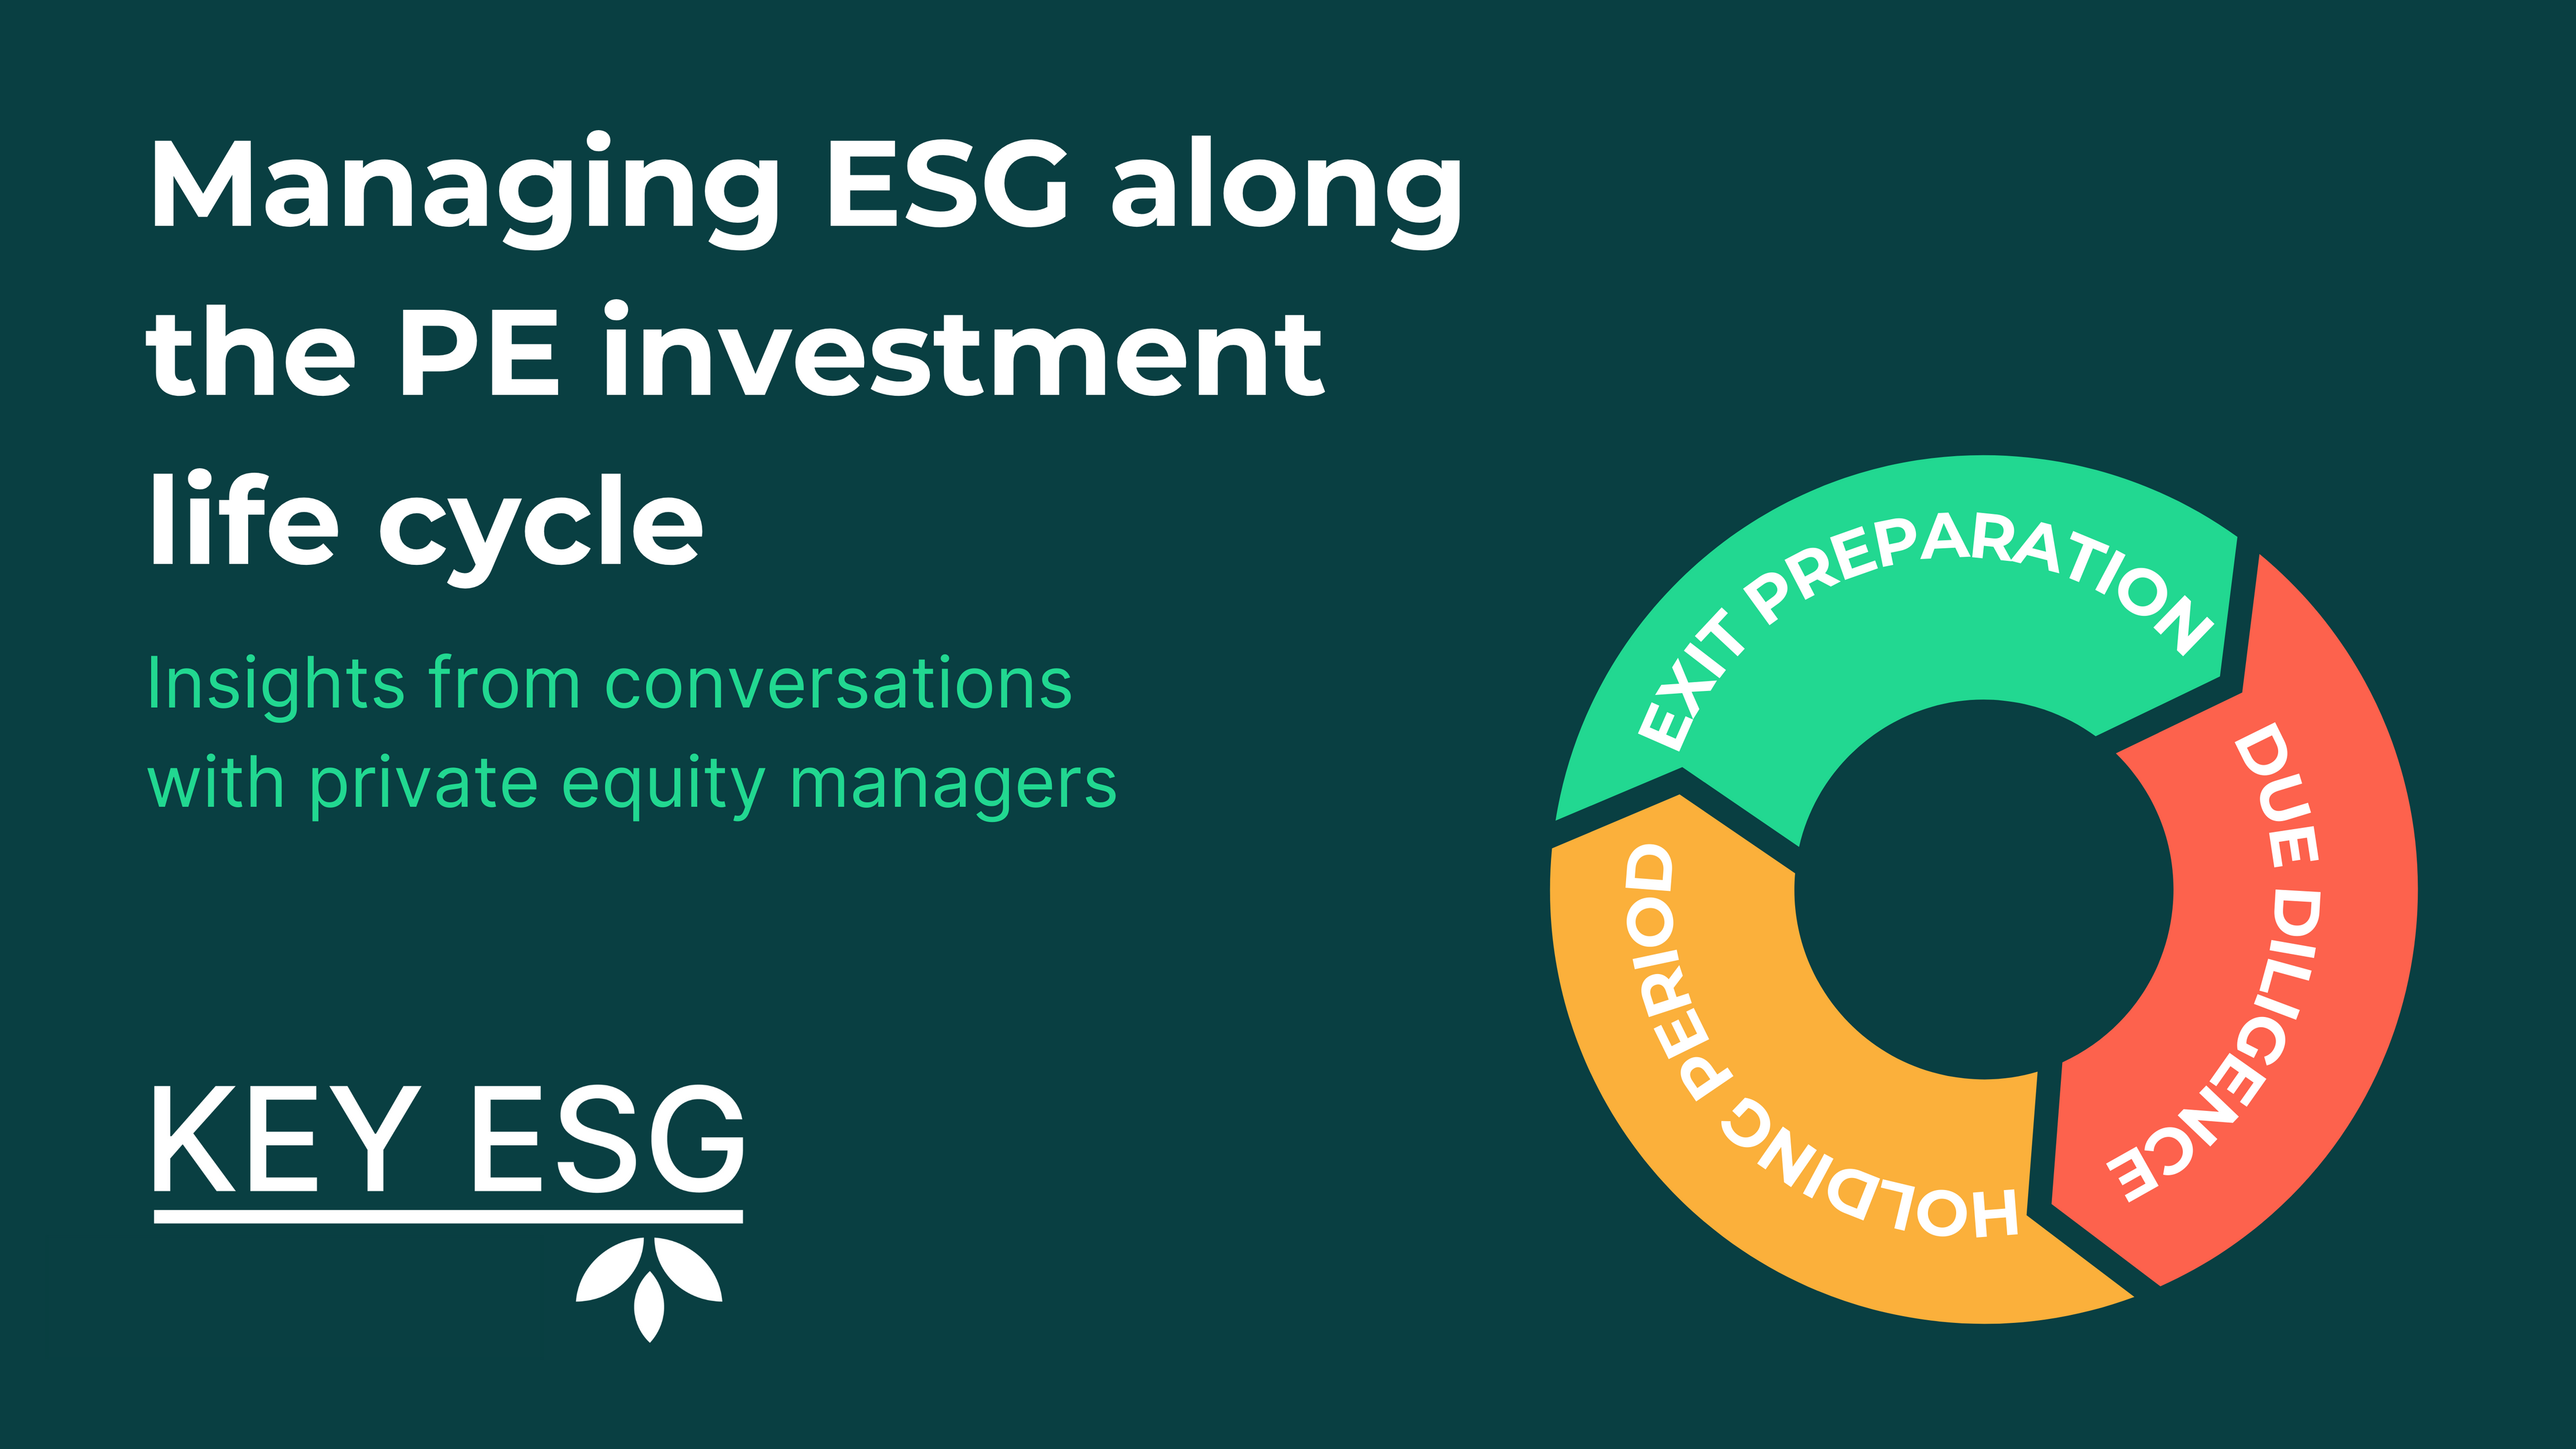 Managing ESG along the PE investment life cycle